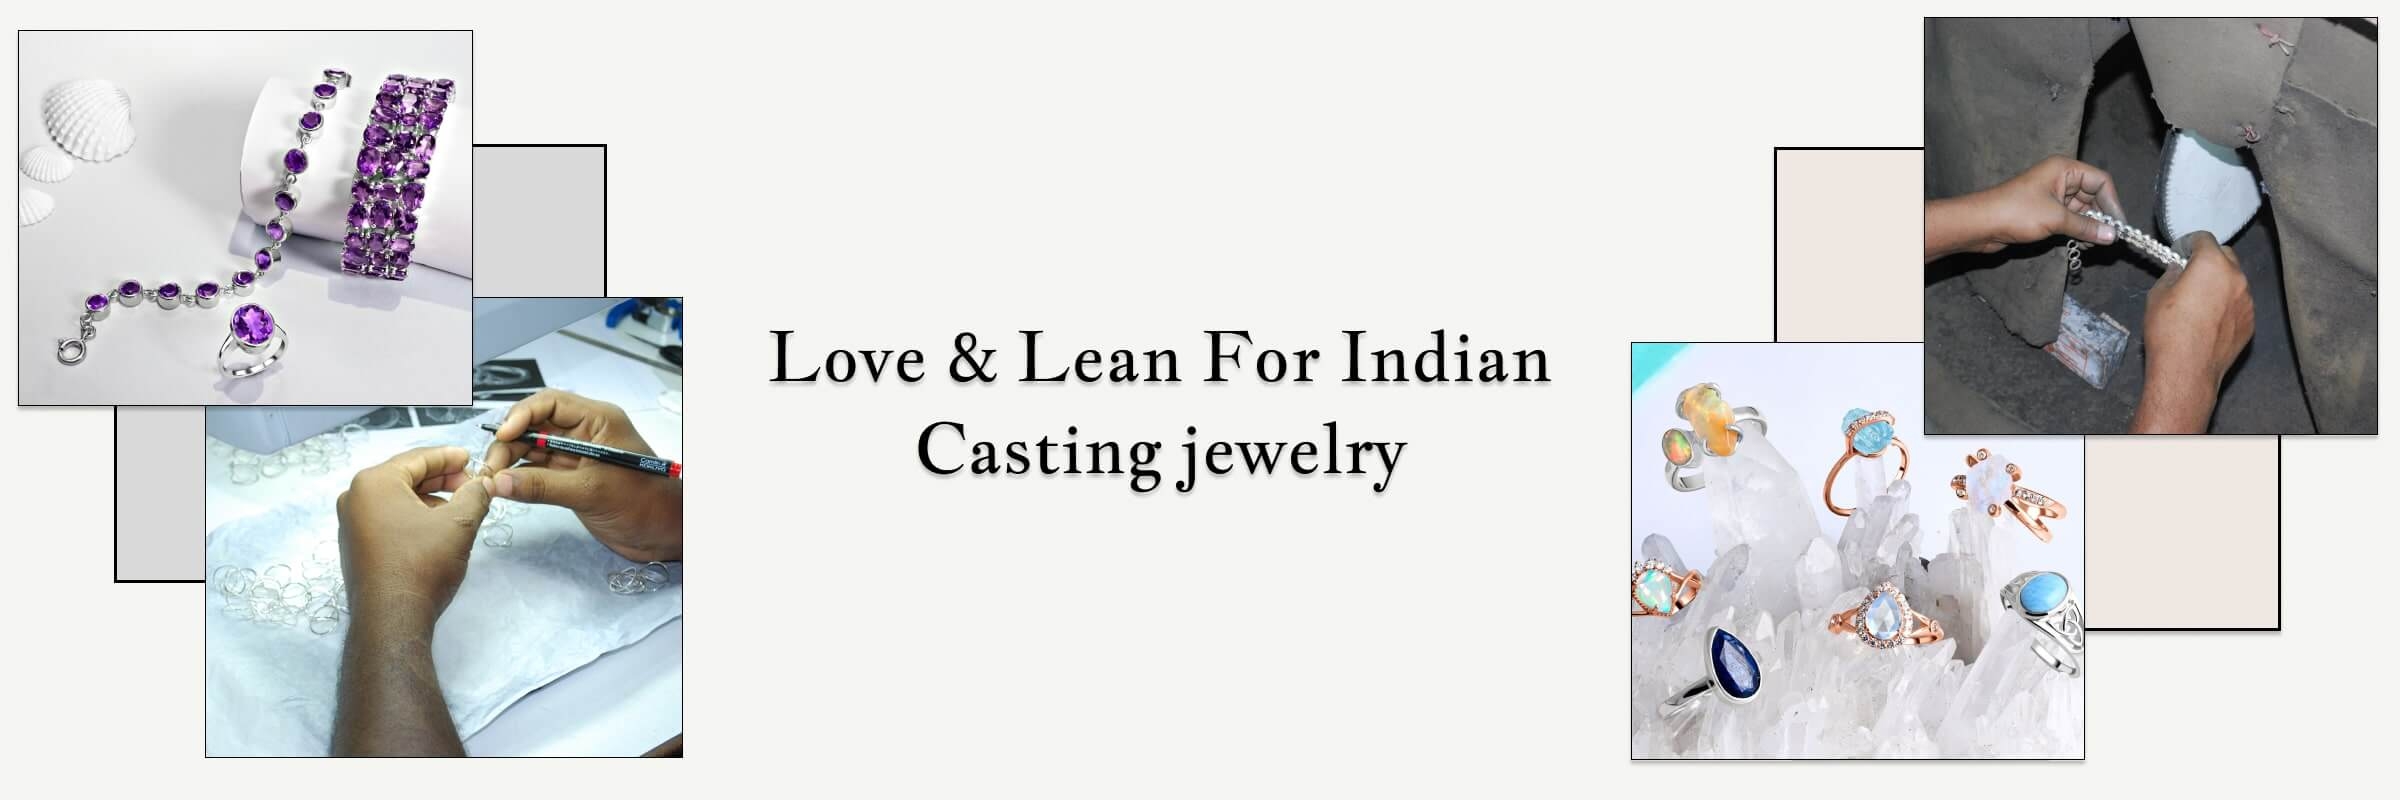 Indian Casting Jewellery Manufacturers